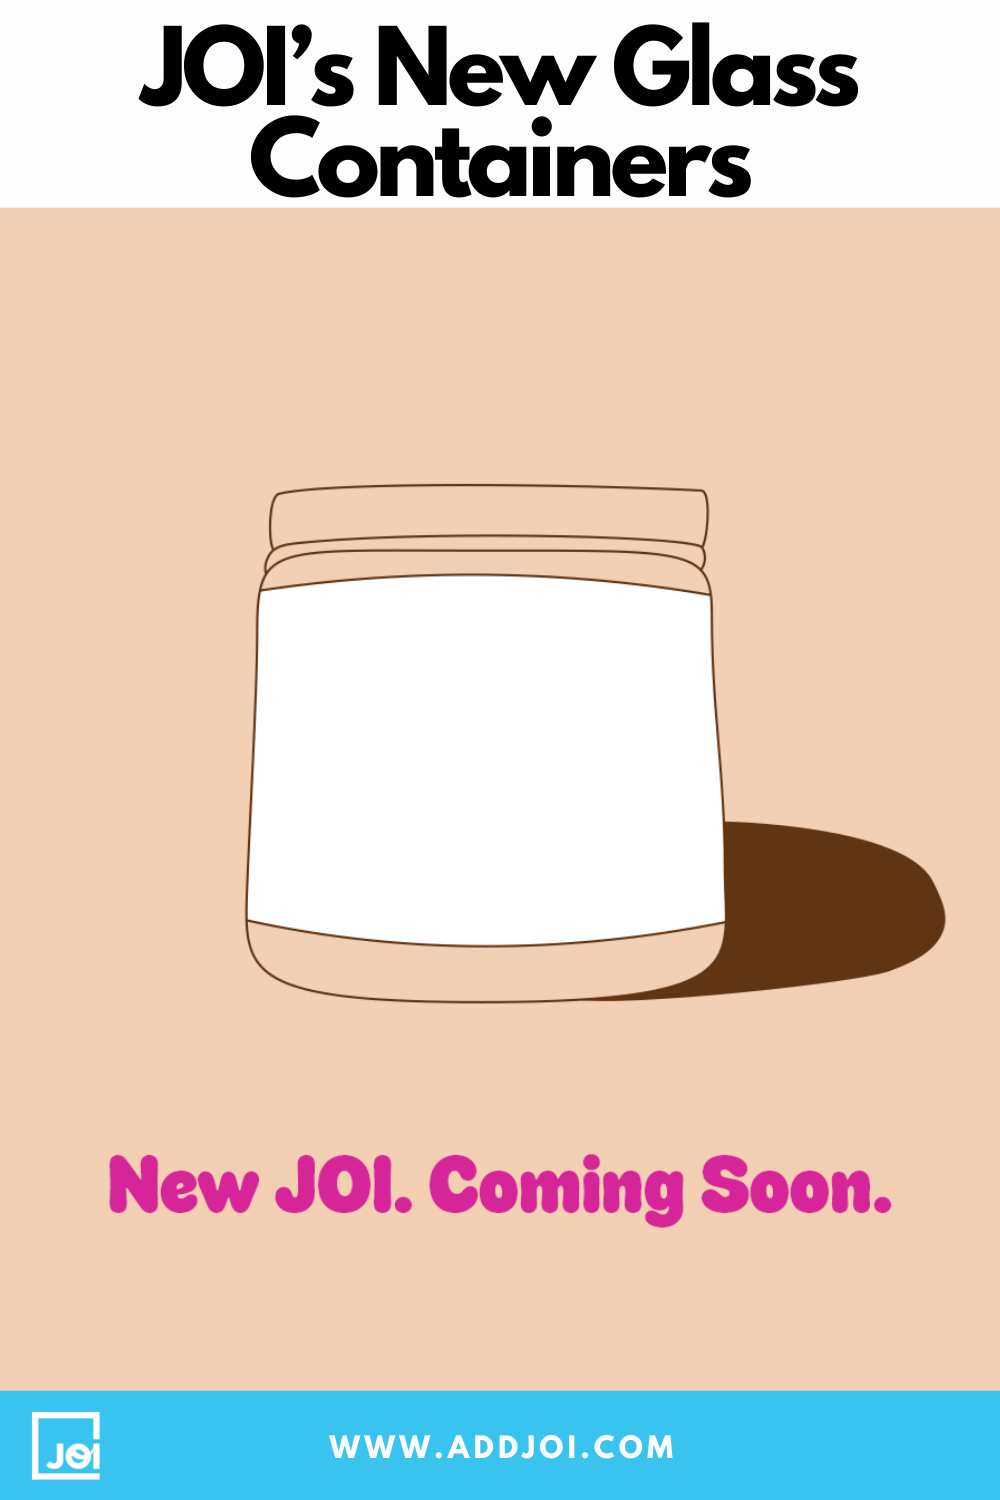 JOI’s New Glass Containers: A More Sustainable, Reusable, Natural and Clean Packaging Alternative